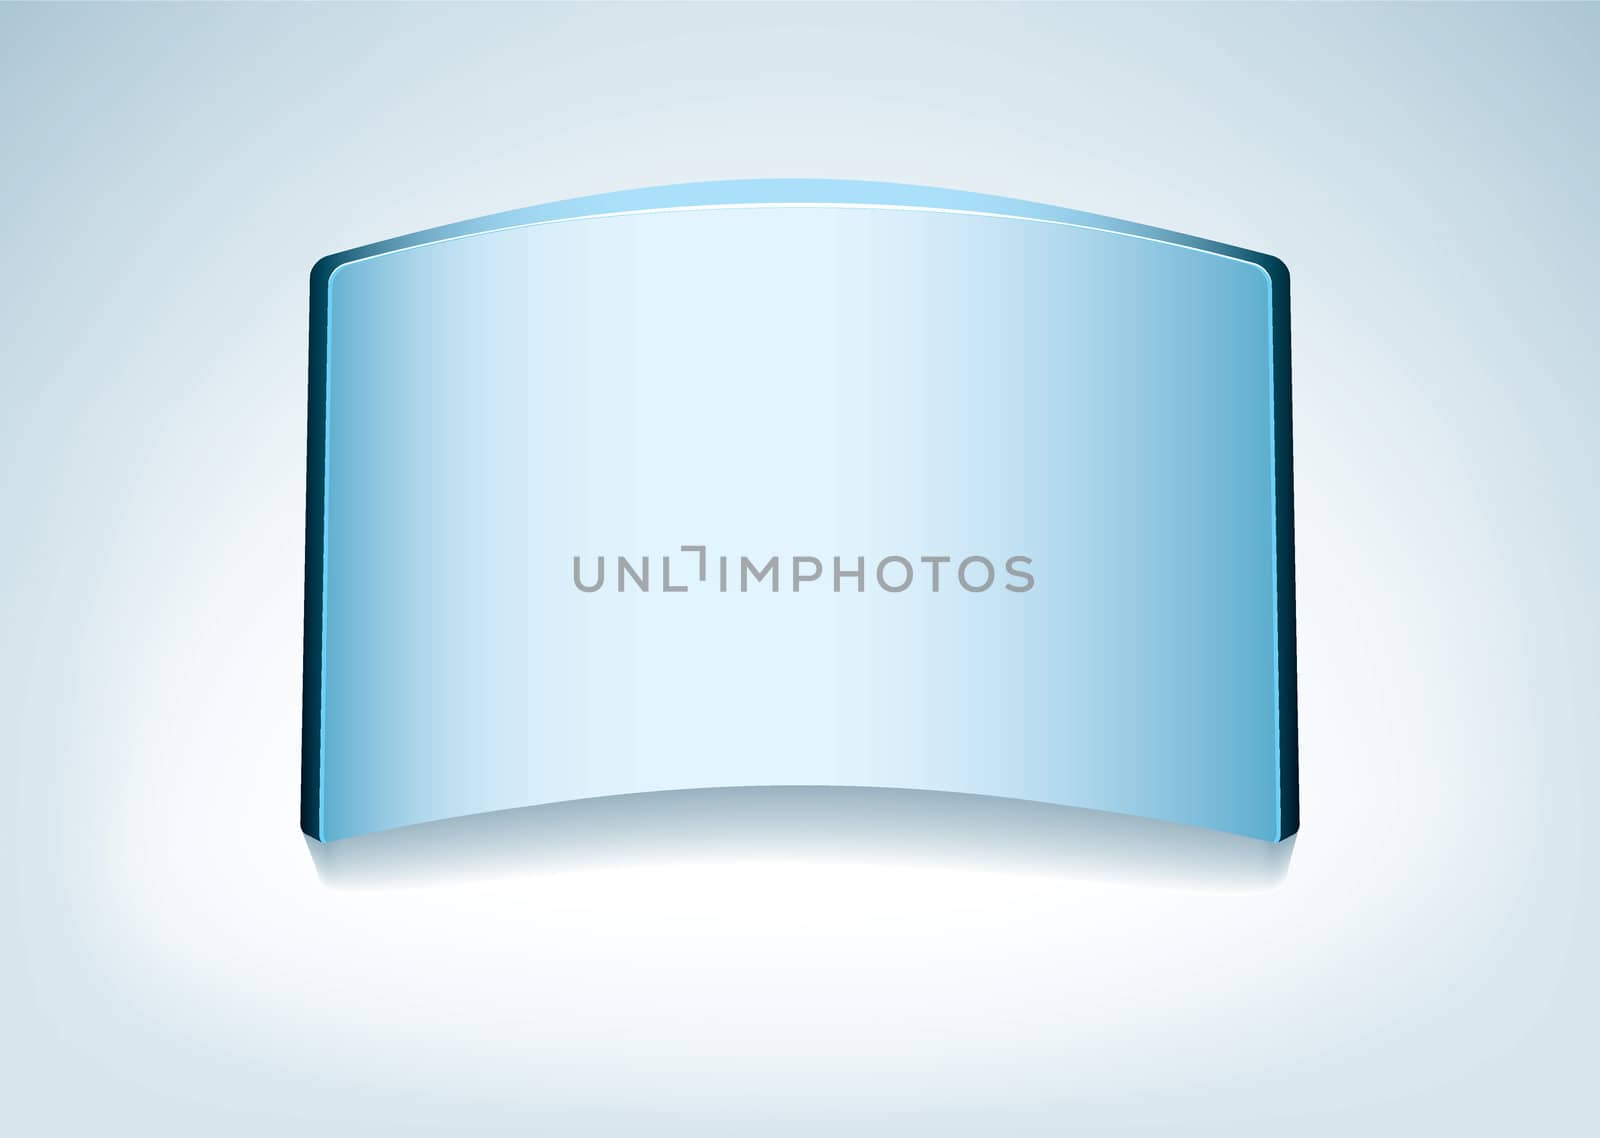 Clear glass name plate or board on blue background